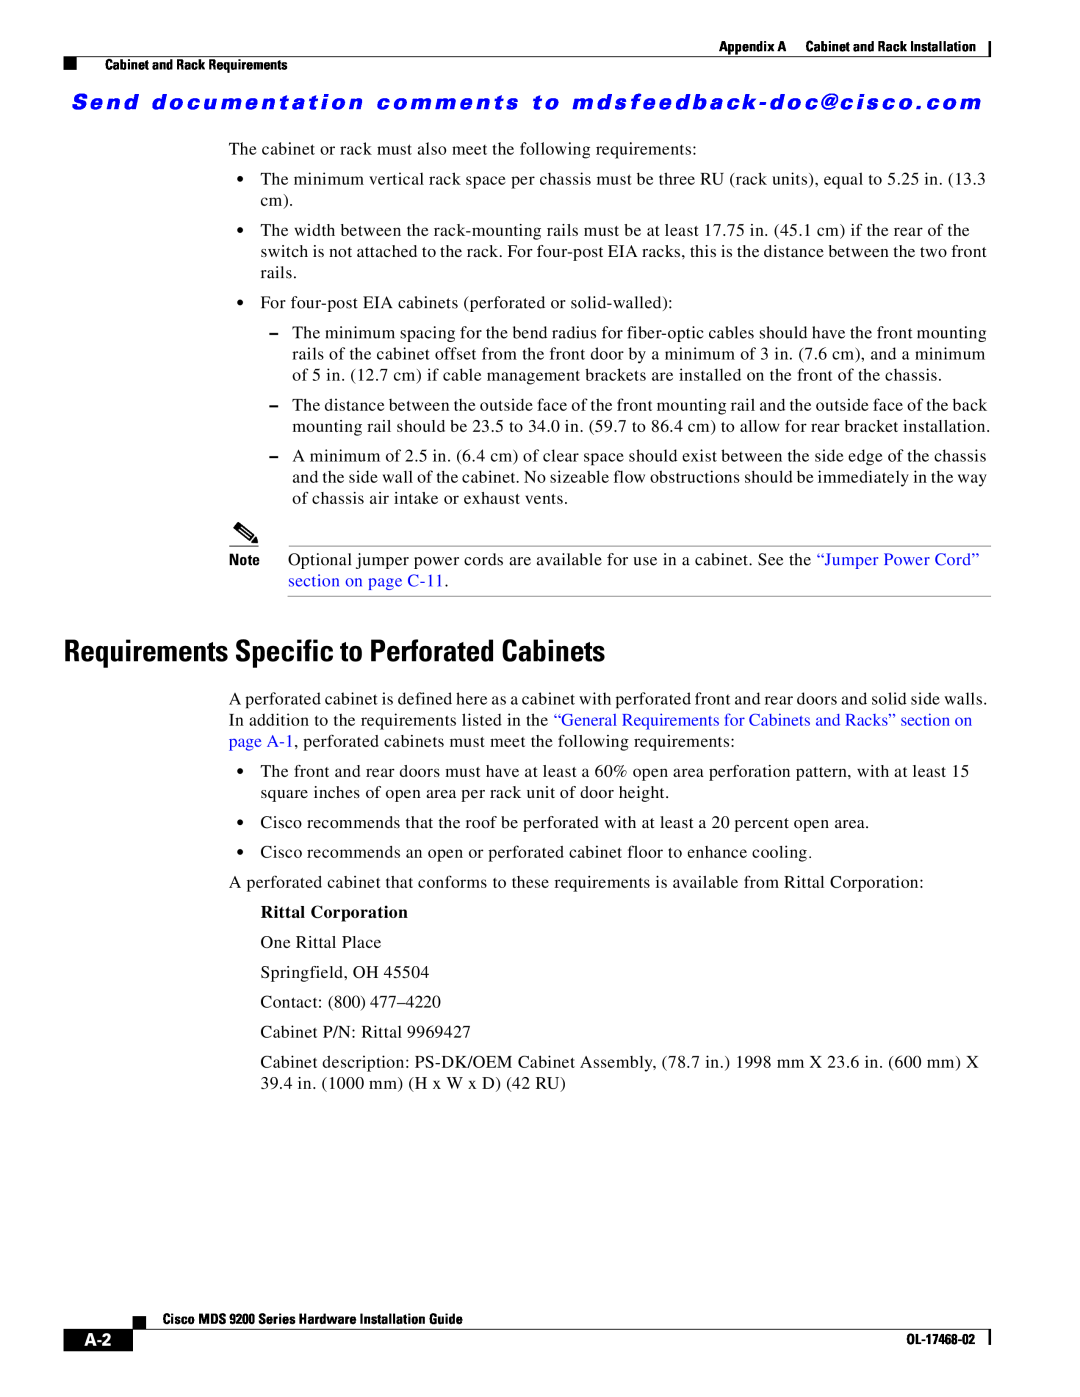 Cisco Systems MDS 9200 Series manual Requirements Specific to Perforated Cabinets, Rittal Corporation 